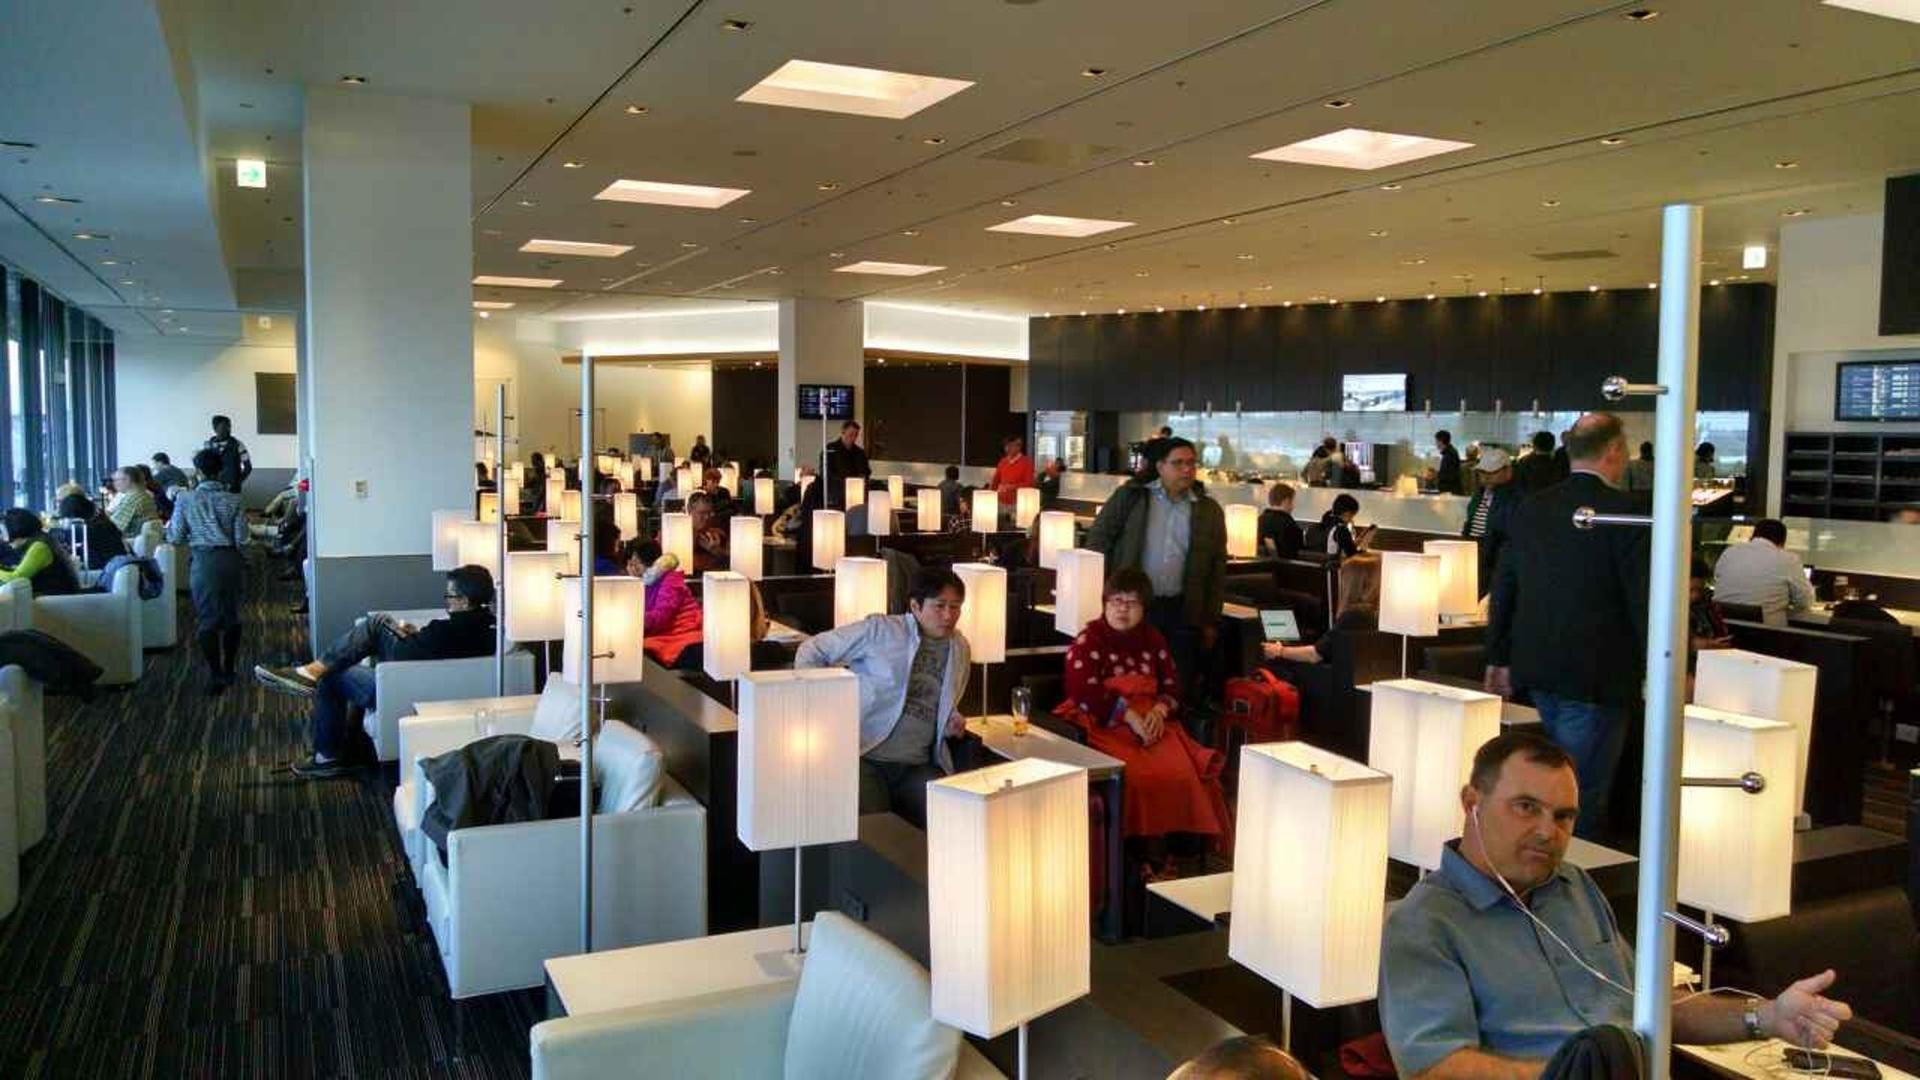 All Nippon Airways ANA Lounge image 37 of 39